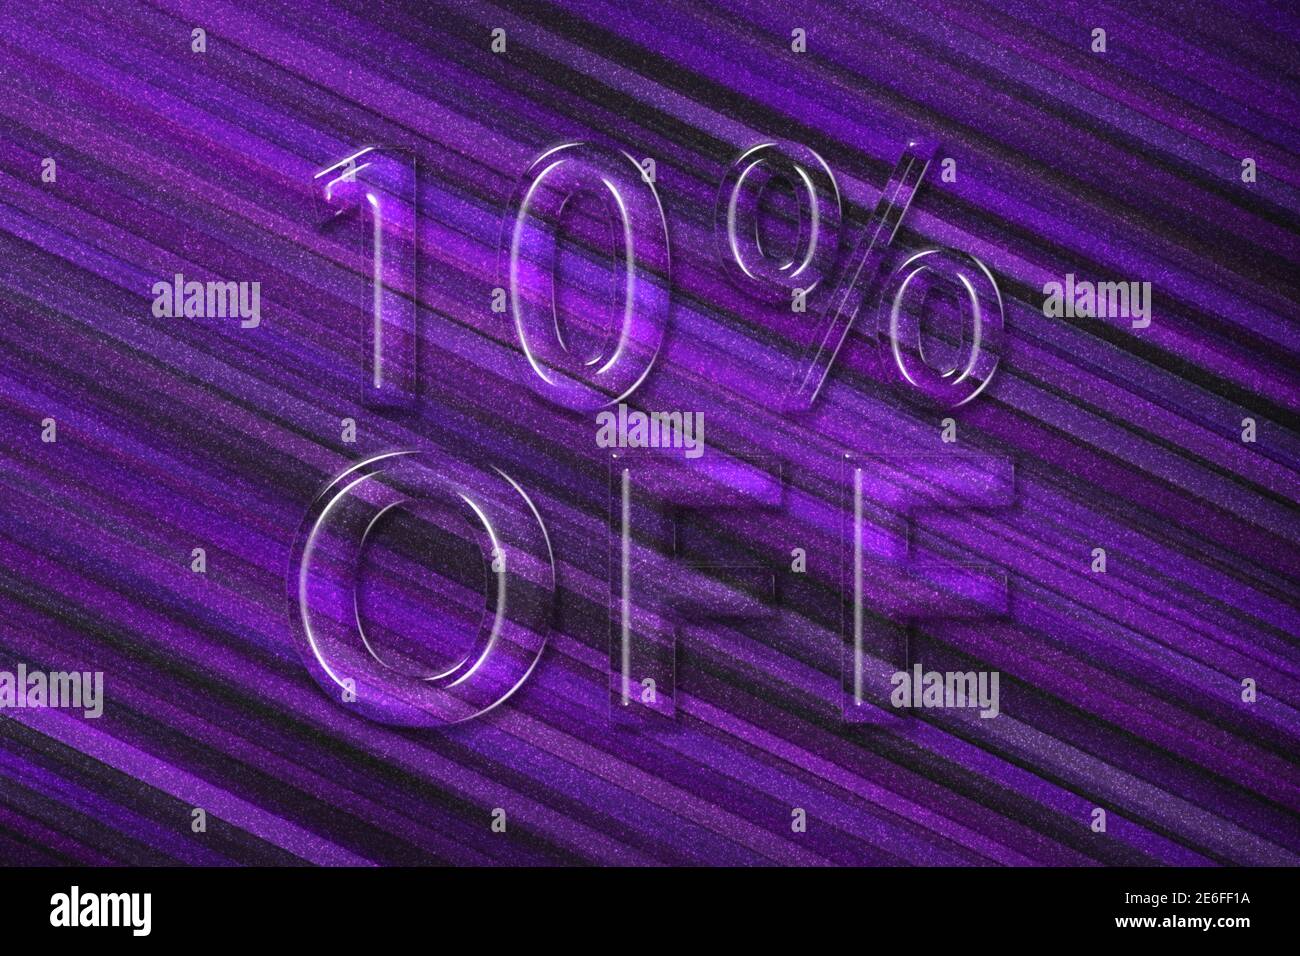 Sale and discount Price off tag, label or badge, 10 percent sale, violet background Stock Photo